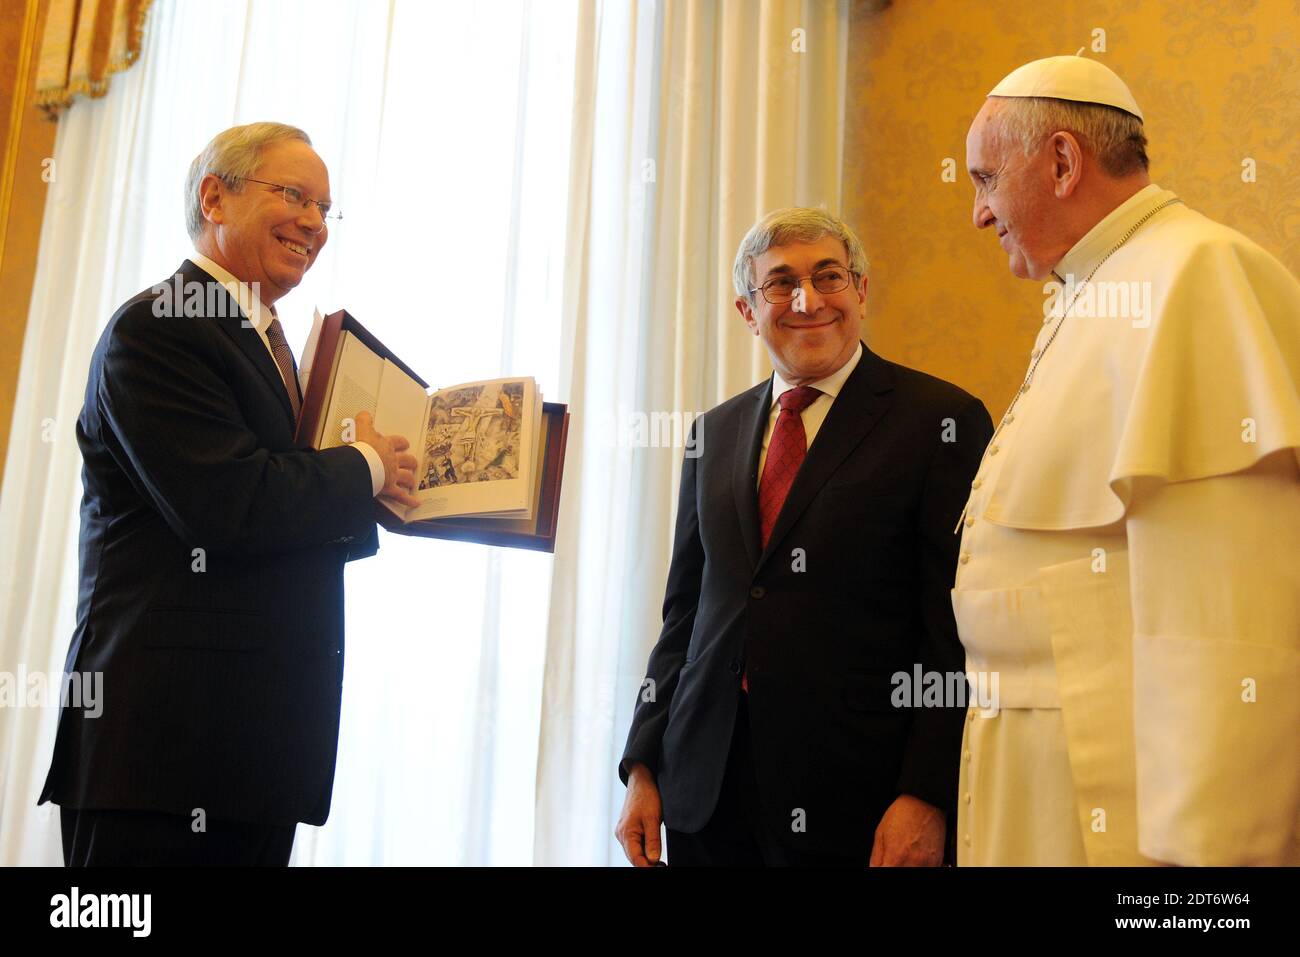 David Inlander, Chair of AJC's Interreligious Affairs Commission and Stanley Bergman AJC President presented to Pope Francis a copy of the Jewish Museum in New York's recent exhibit book, Chagall: Love, War and Exile, which includes one of the Pope's favorite works of art, Marc Chagall's 1938 painting, White Crucifixion.Pope Francis Receives American Jewish Committee (AJC) Leadership Delegation at Vatican on February 13, 2014. A pioneer in advancing Catholic-Jewish relations over many decades, AJC enjoys close, cooperative relations with the Vatican, as well as with American Catholic leadershi Stock Photo